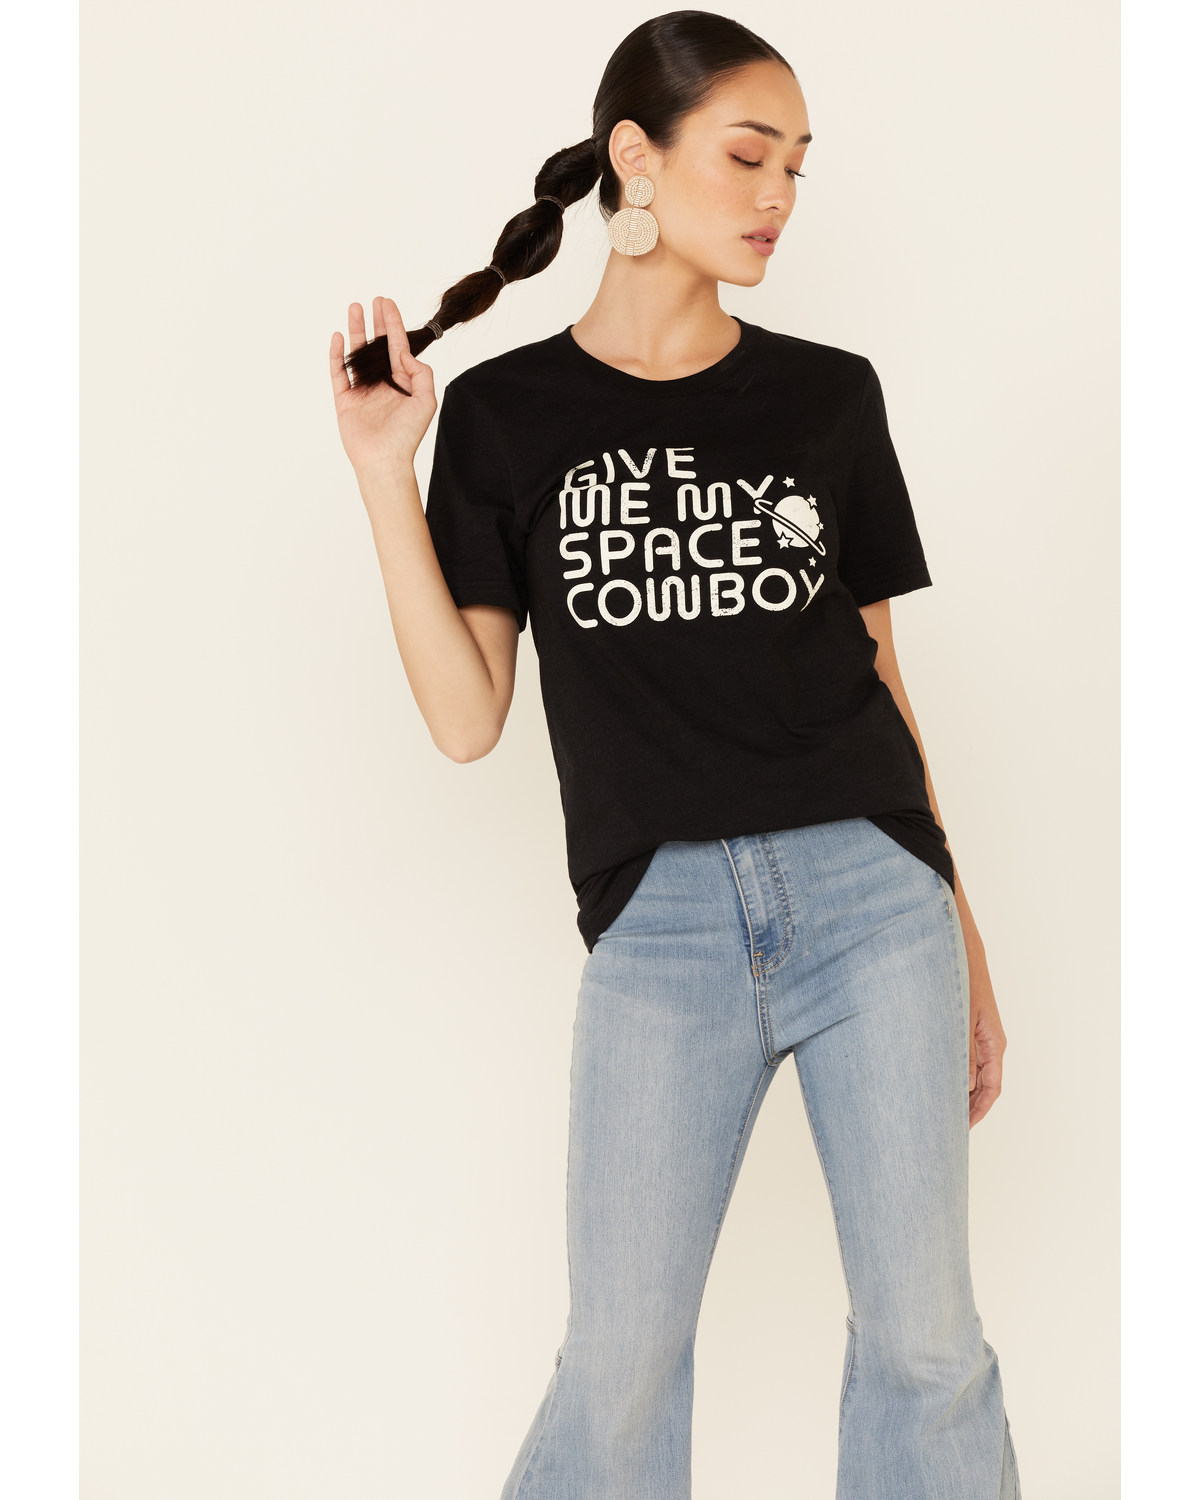 Ali Dee Women's Give Me My Space Cowboy Graphic Short Sleeve Tee